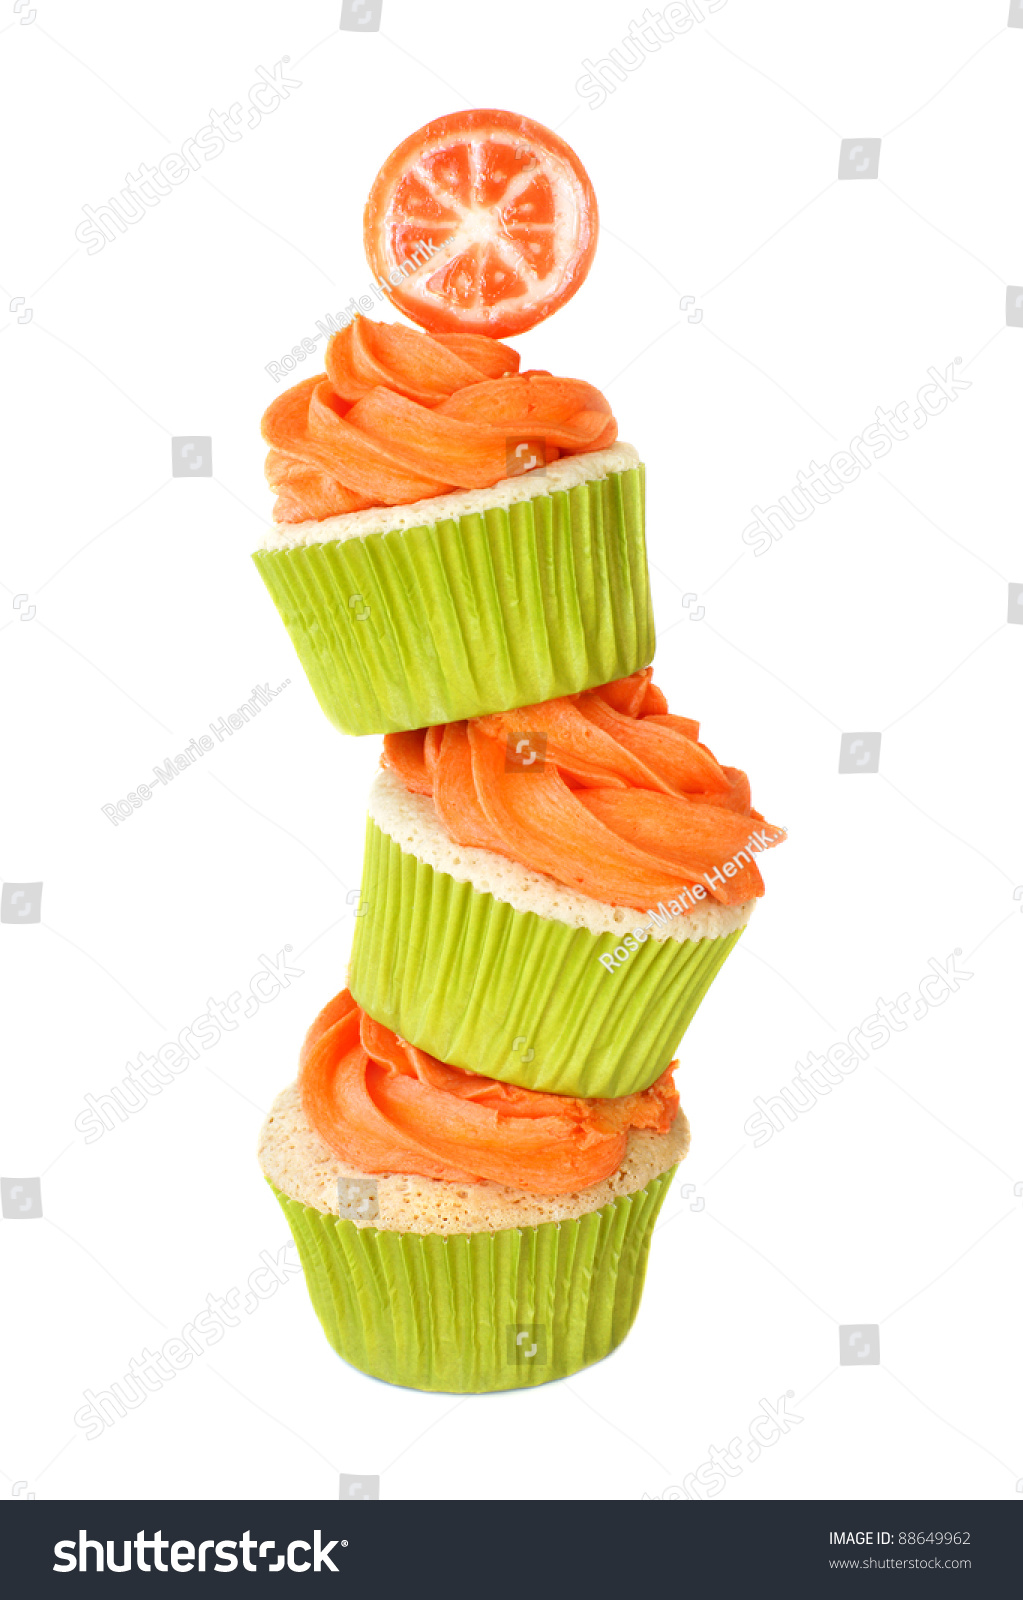 Stacked Cupcakes